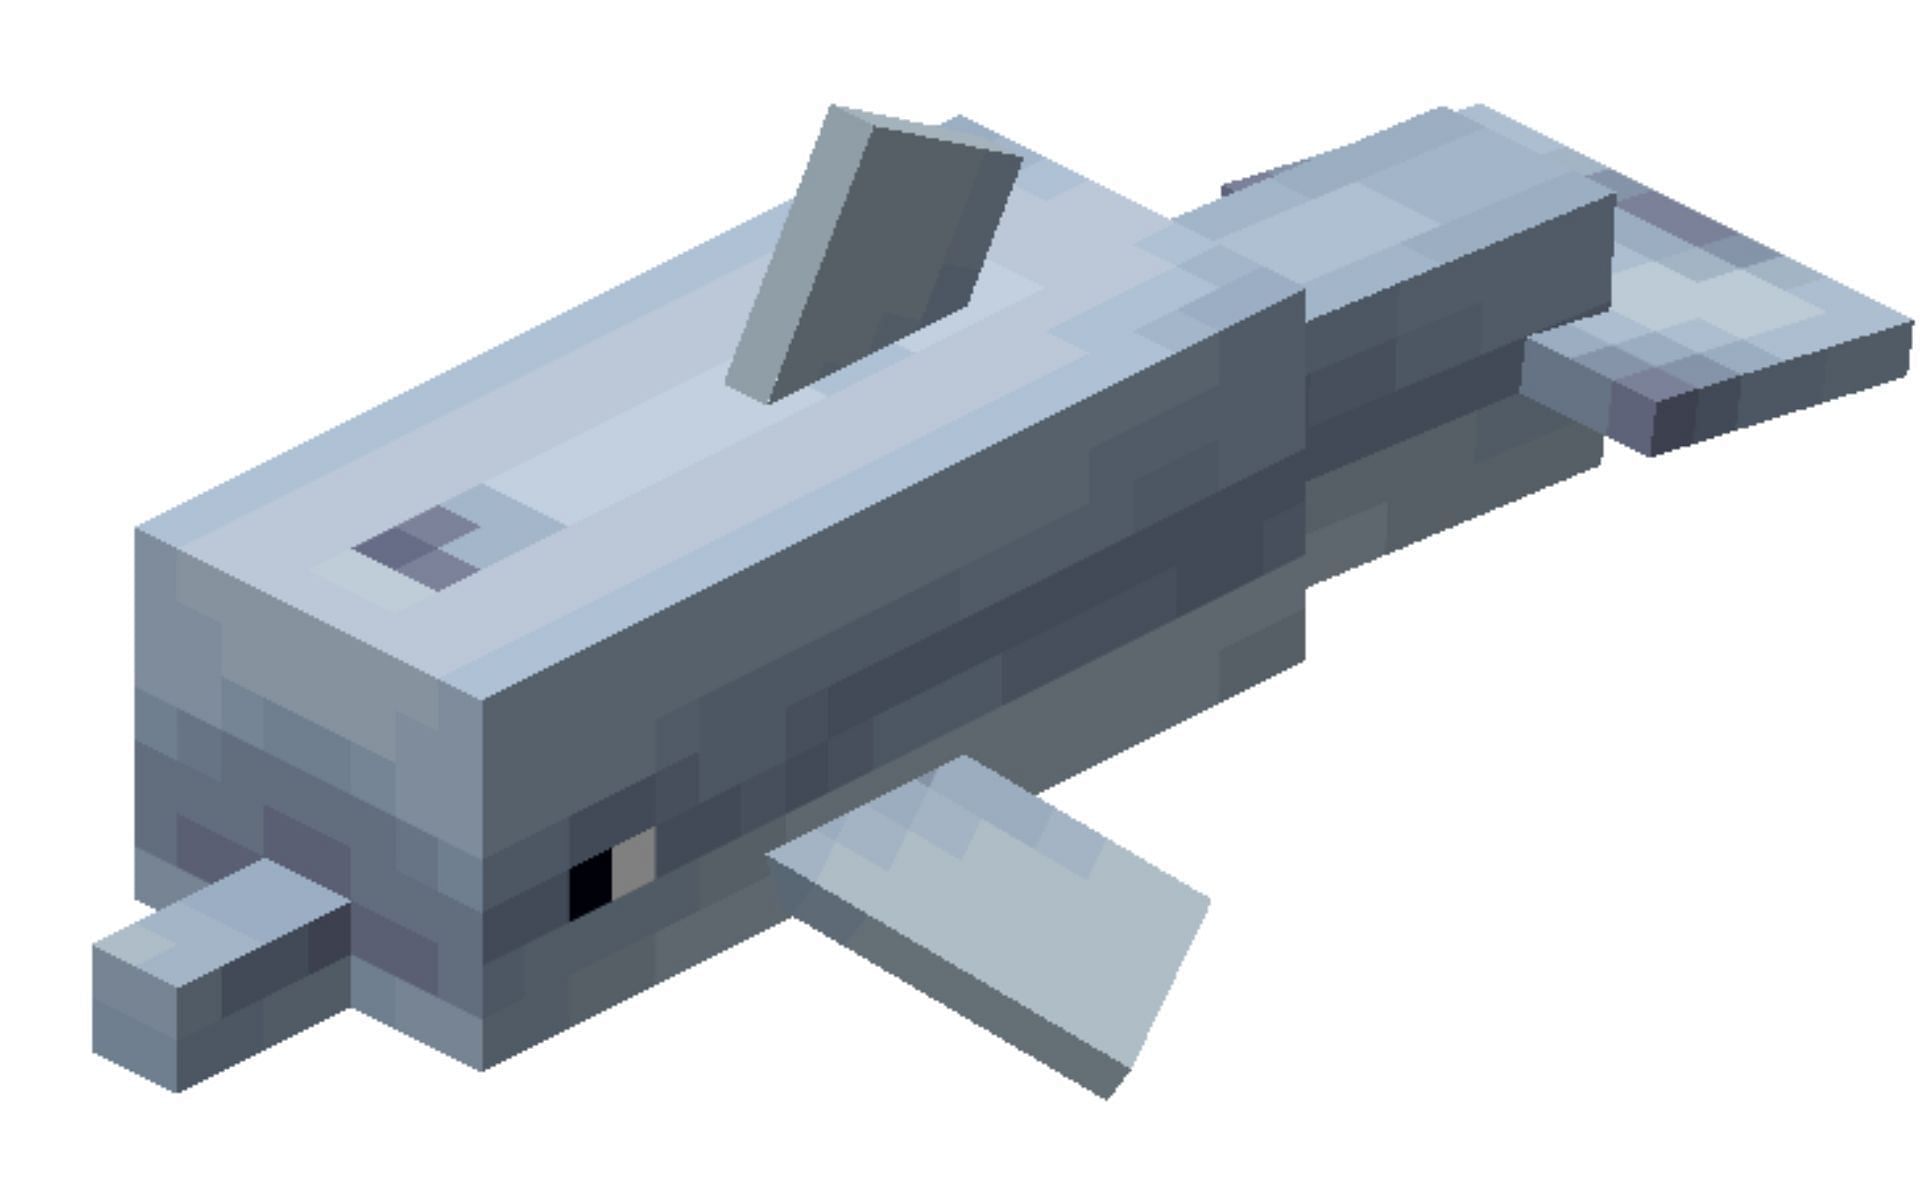 In-game model of the Dolphin (Image via Fandom)